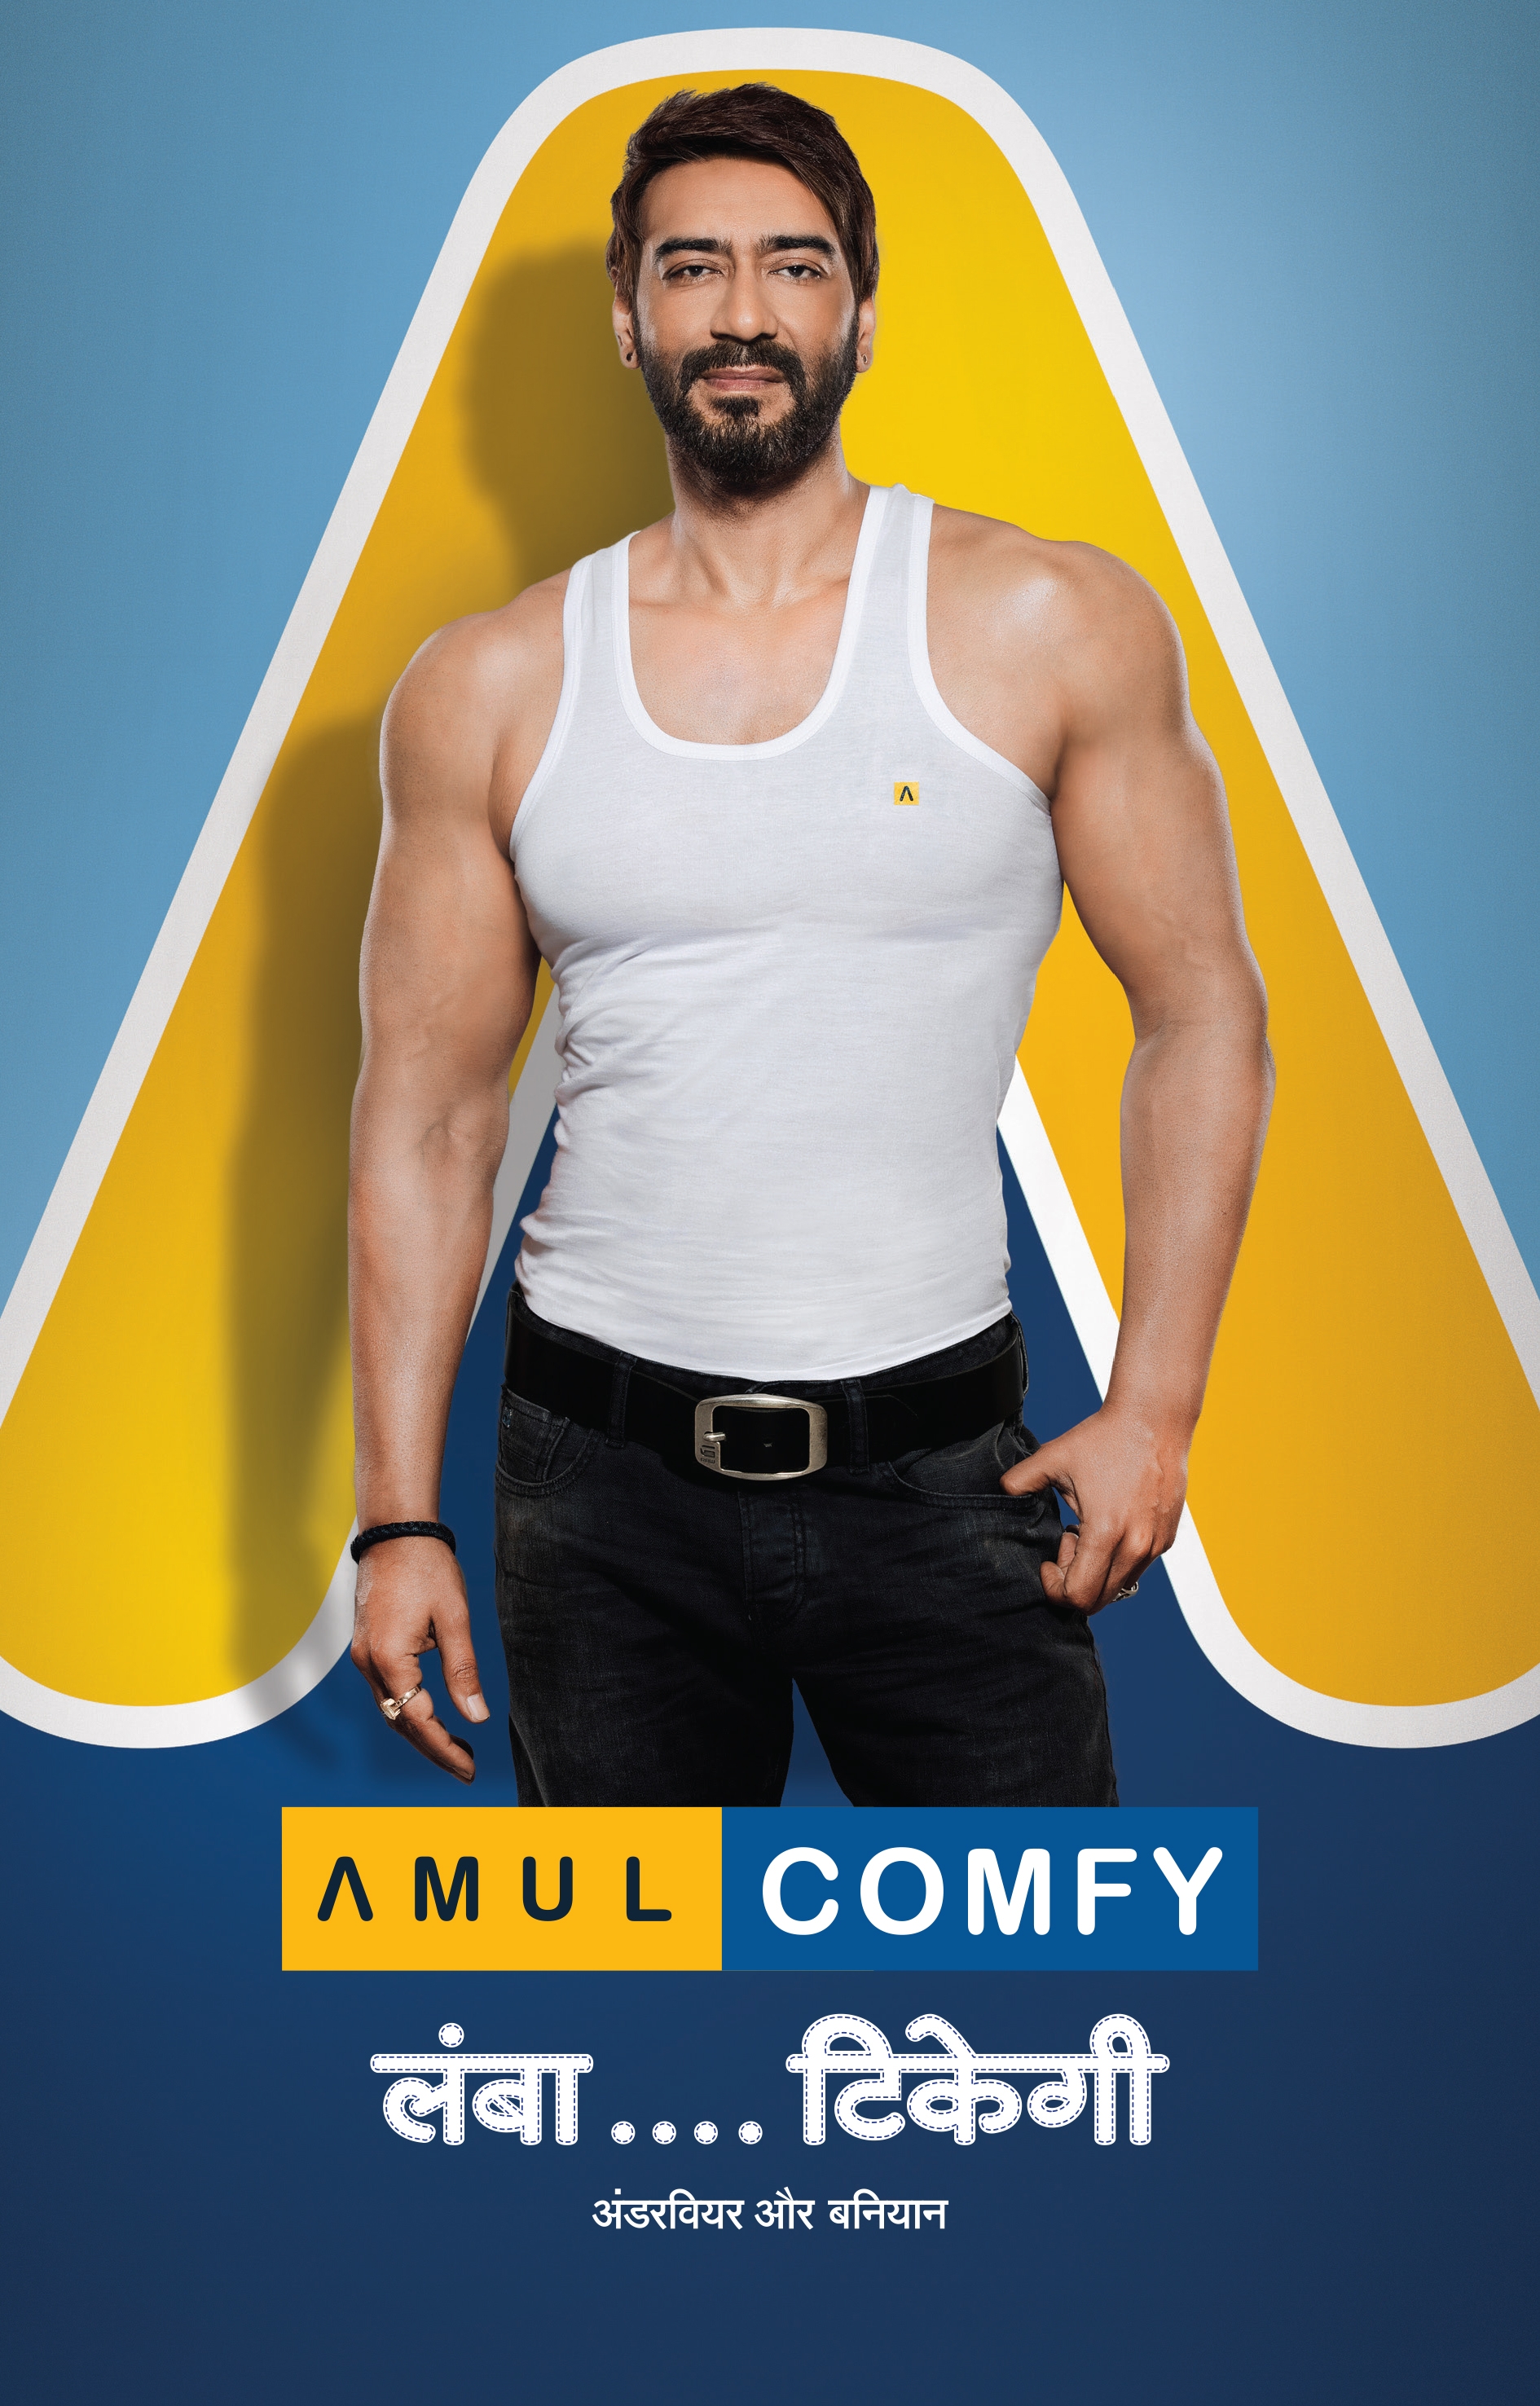 Ajay Devgan shows how to stand the test of time with Amul comfy